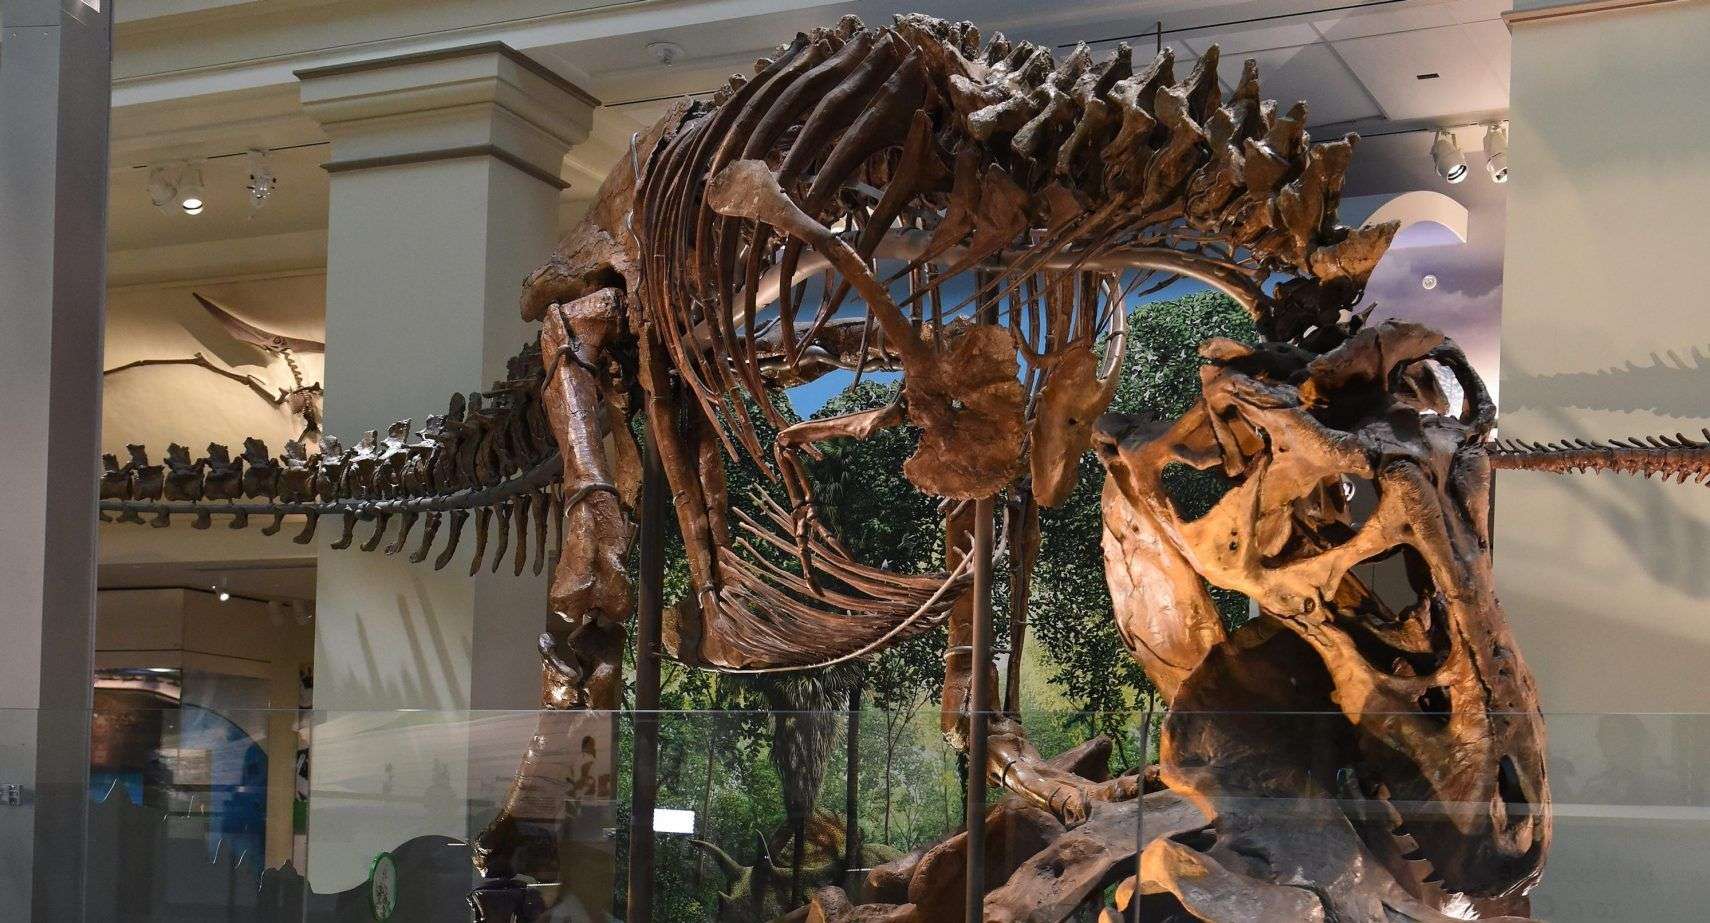 The 10 Best Dinosaur Museums in the World, Ranked